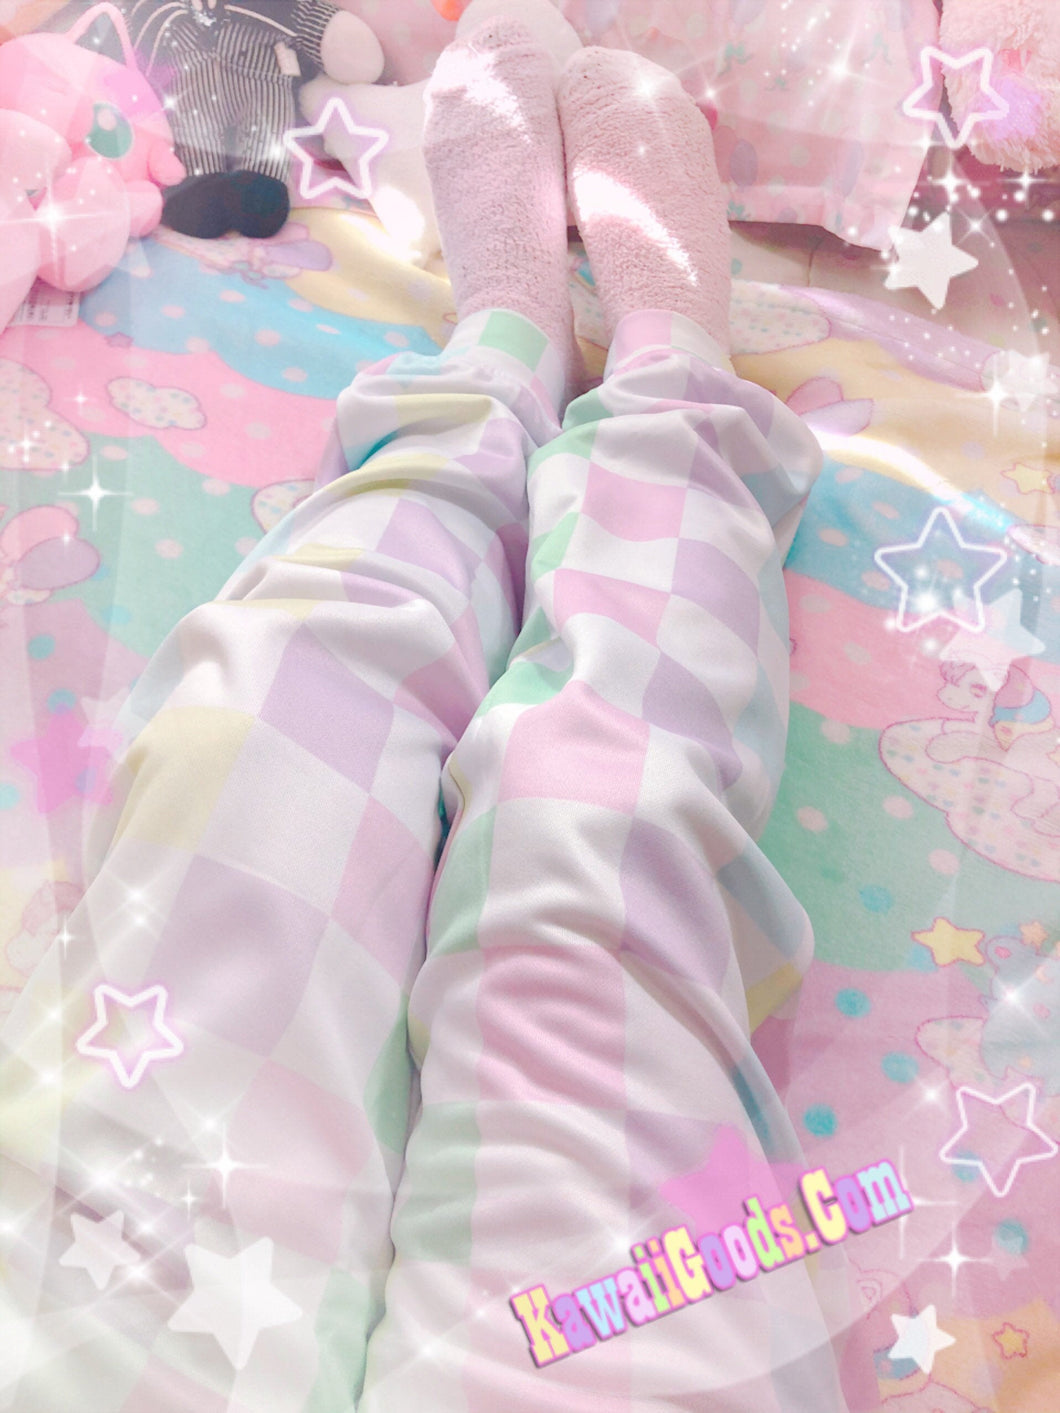 Pastel Checkered Fairy Kei Pants Joggers (Made to Order)